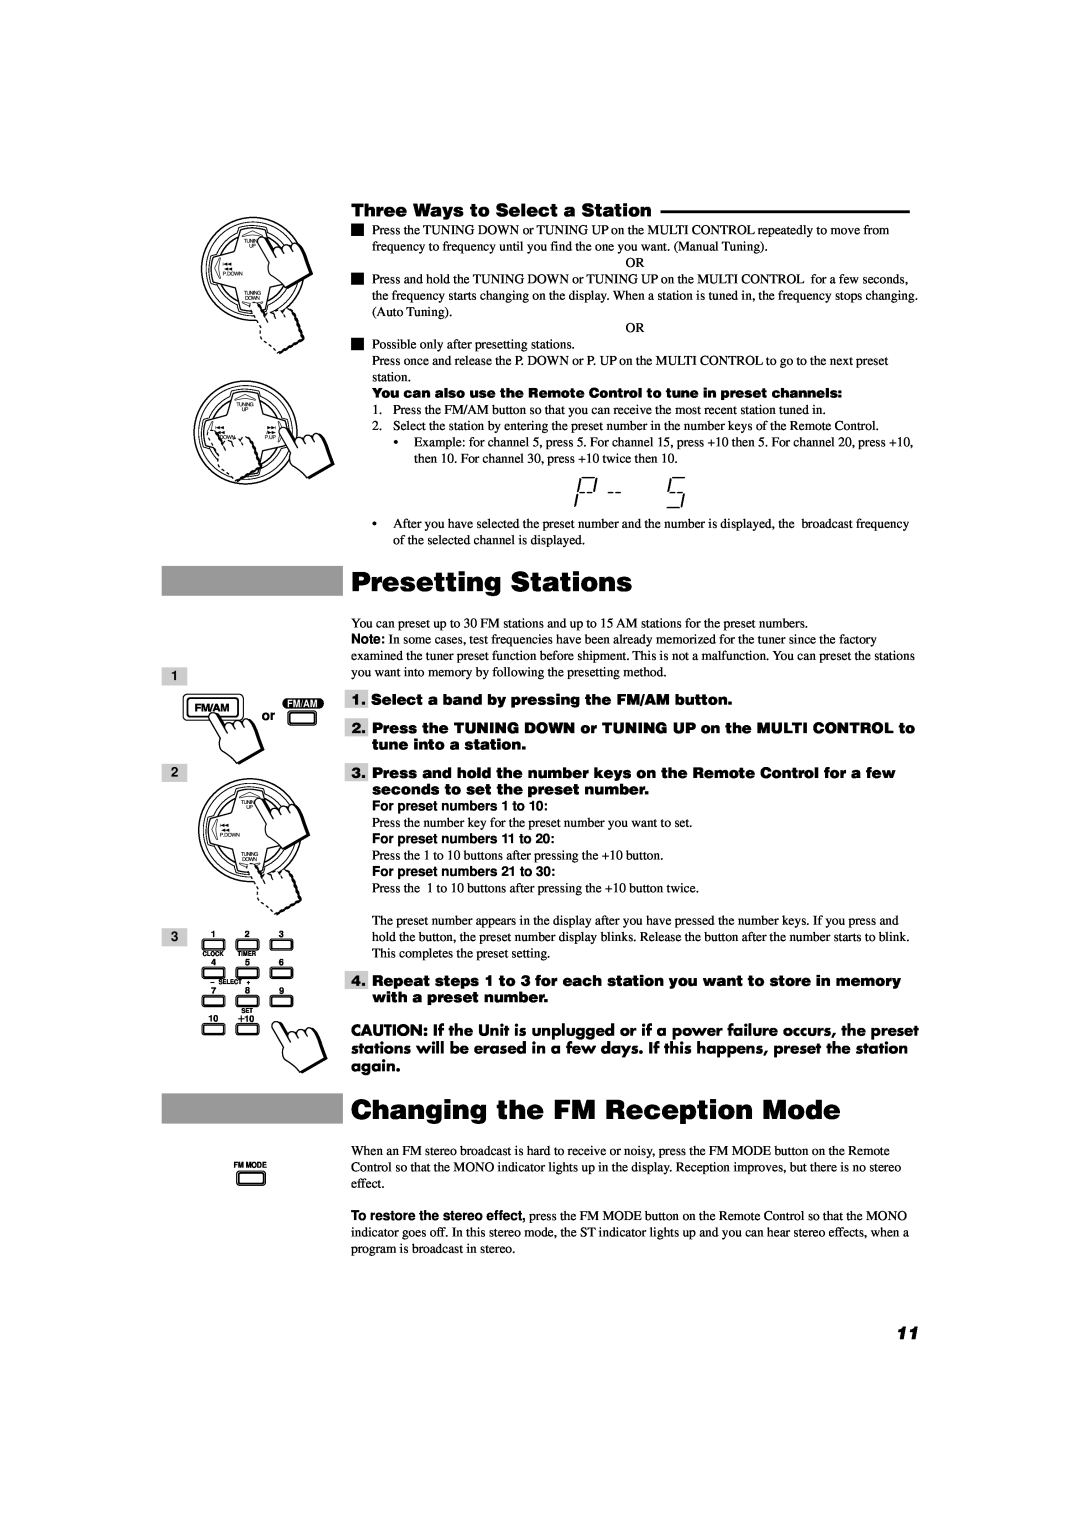 JVC SP-D302 manual Presetting Stations, Changing the FM Reception Mode, Three Ways to Select a Station 